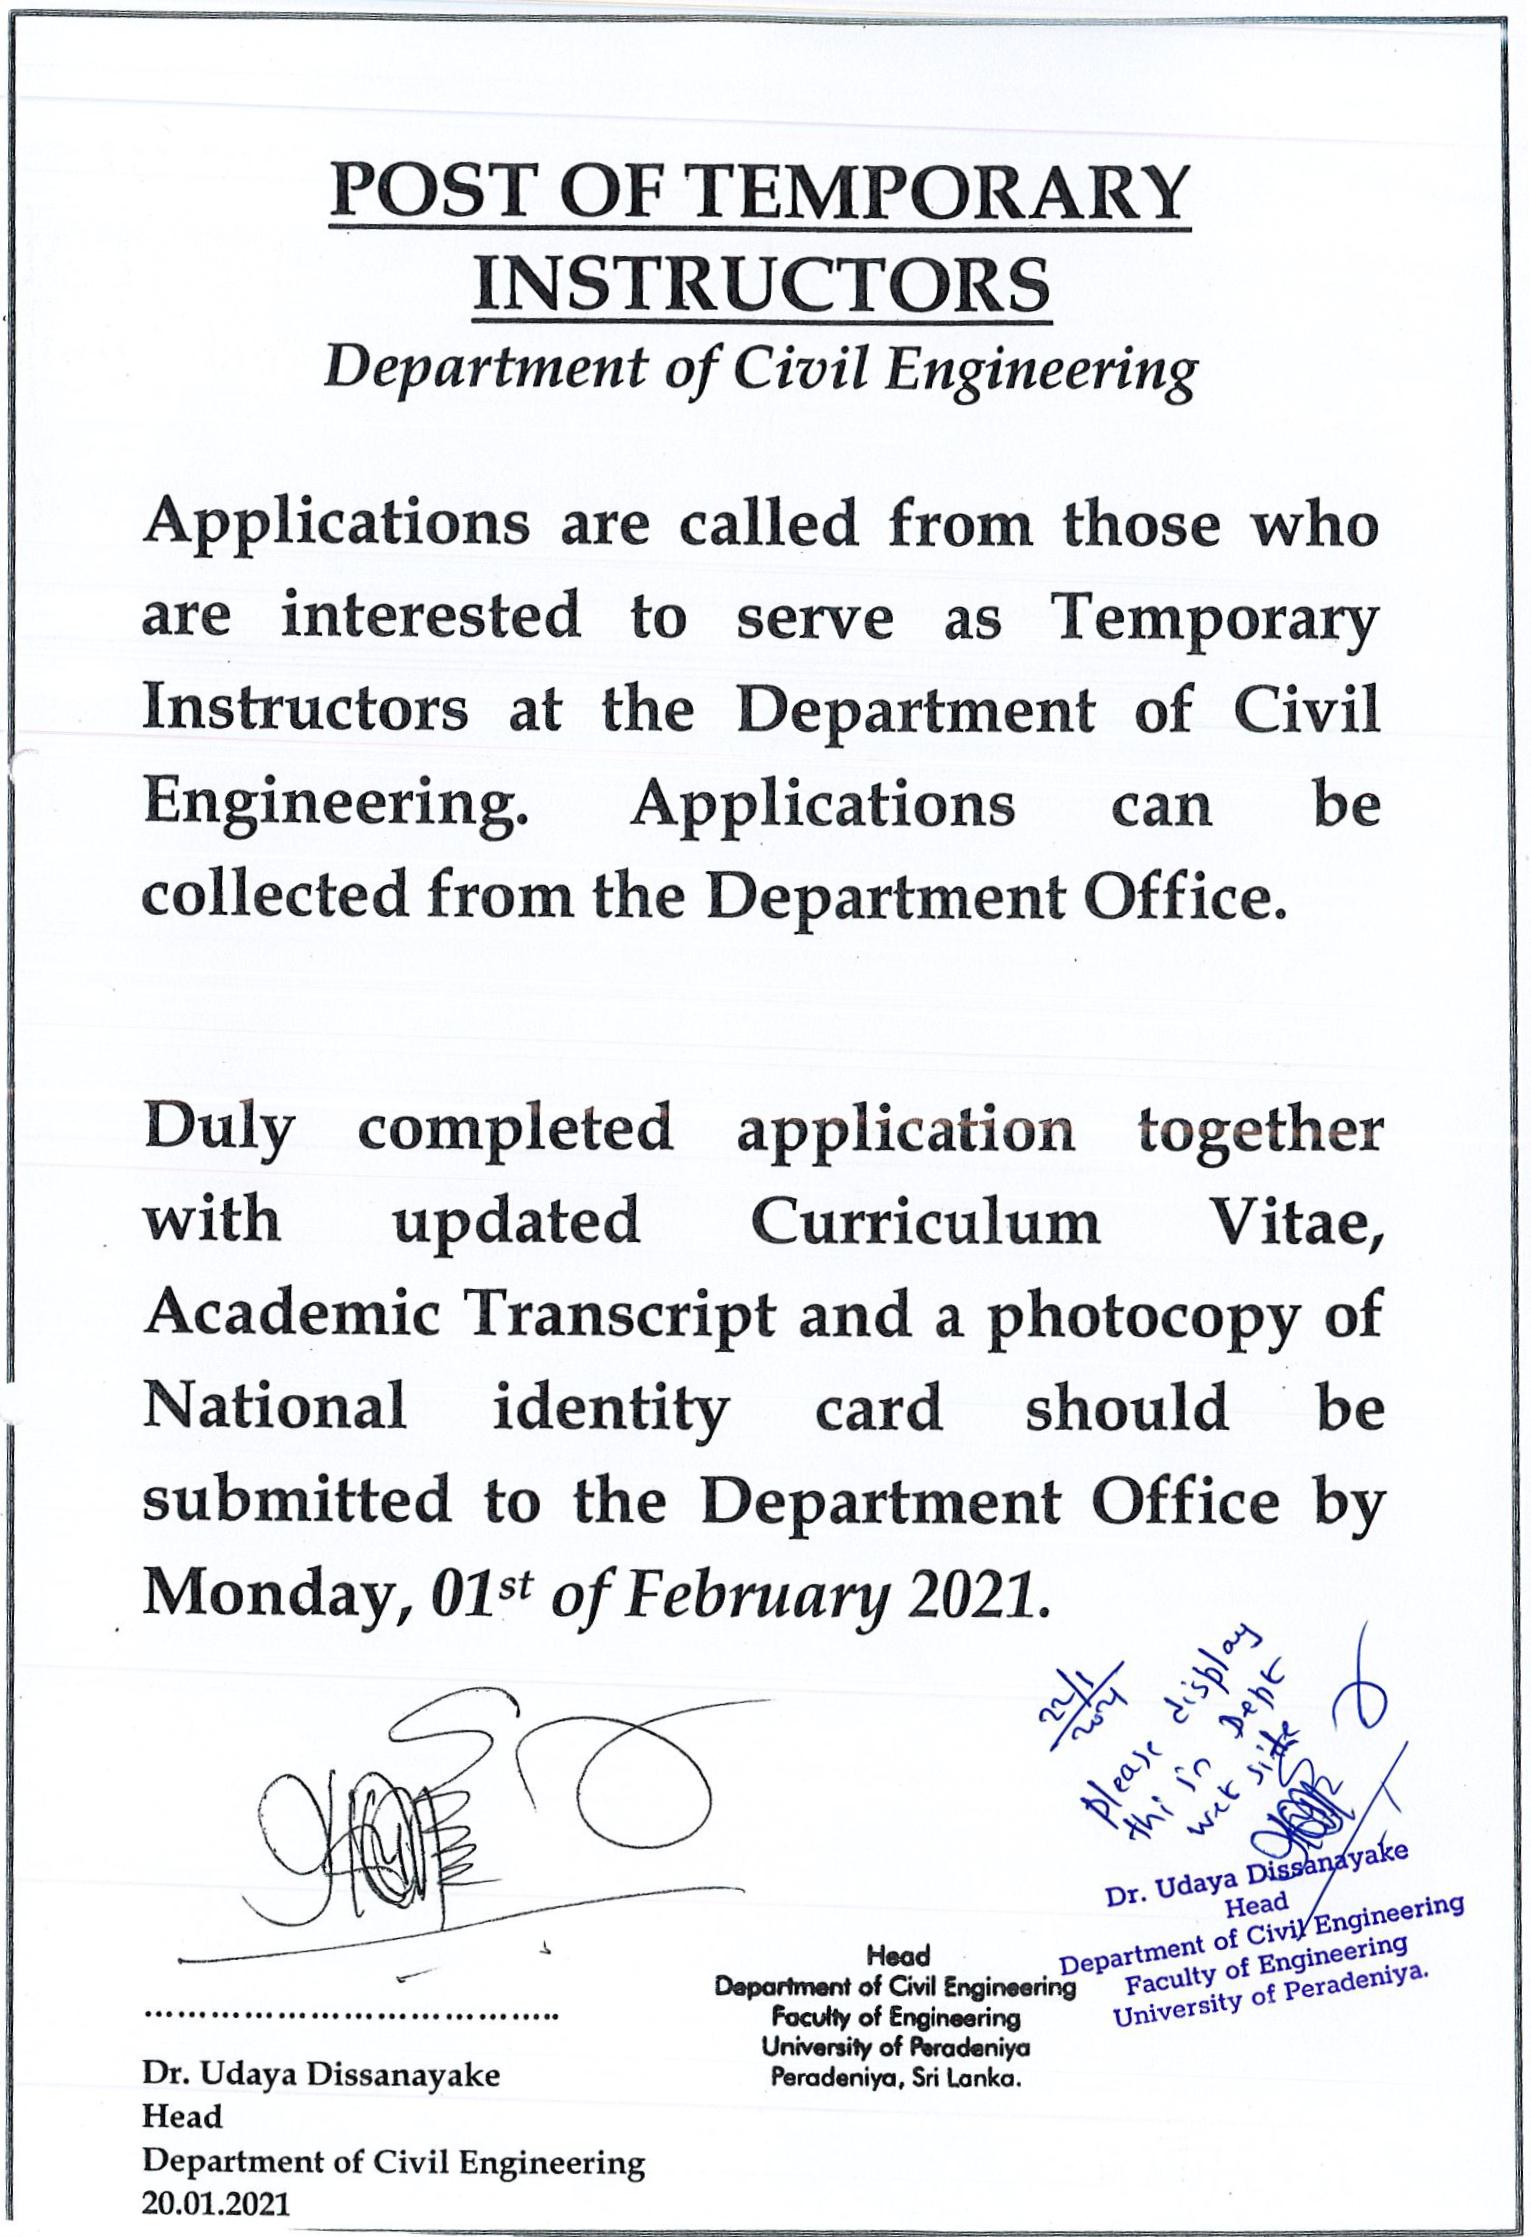 Post of Temporary Instructors: Department of Civil Engineering